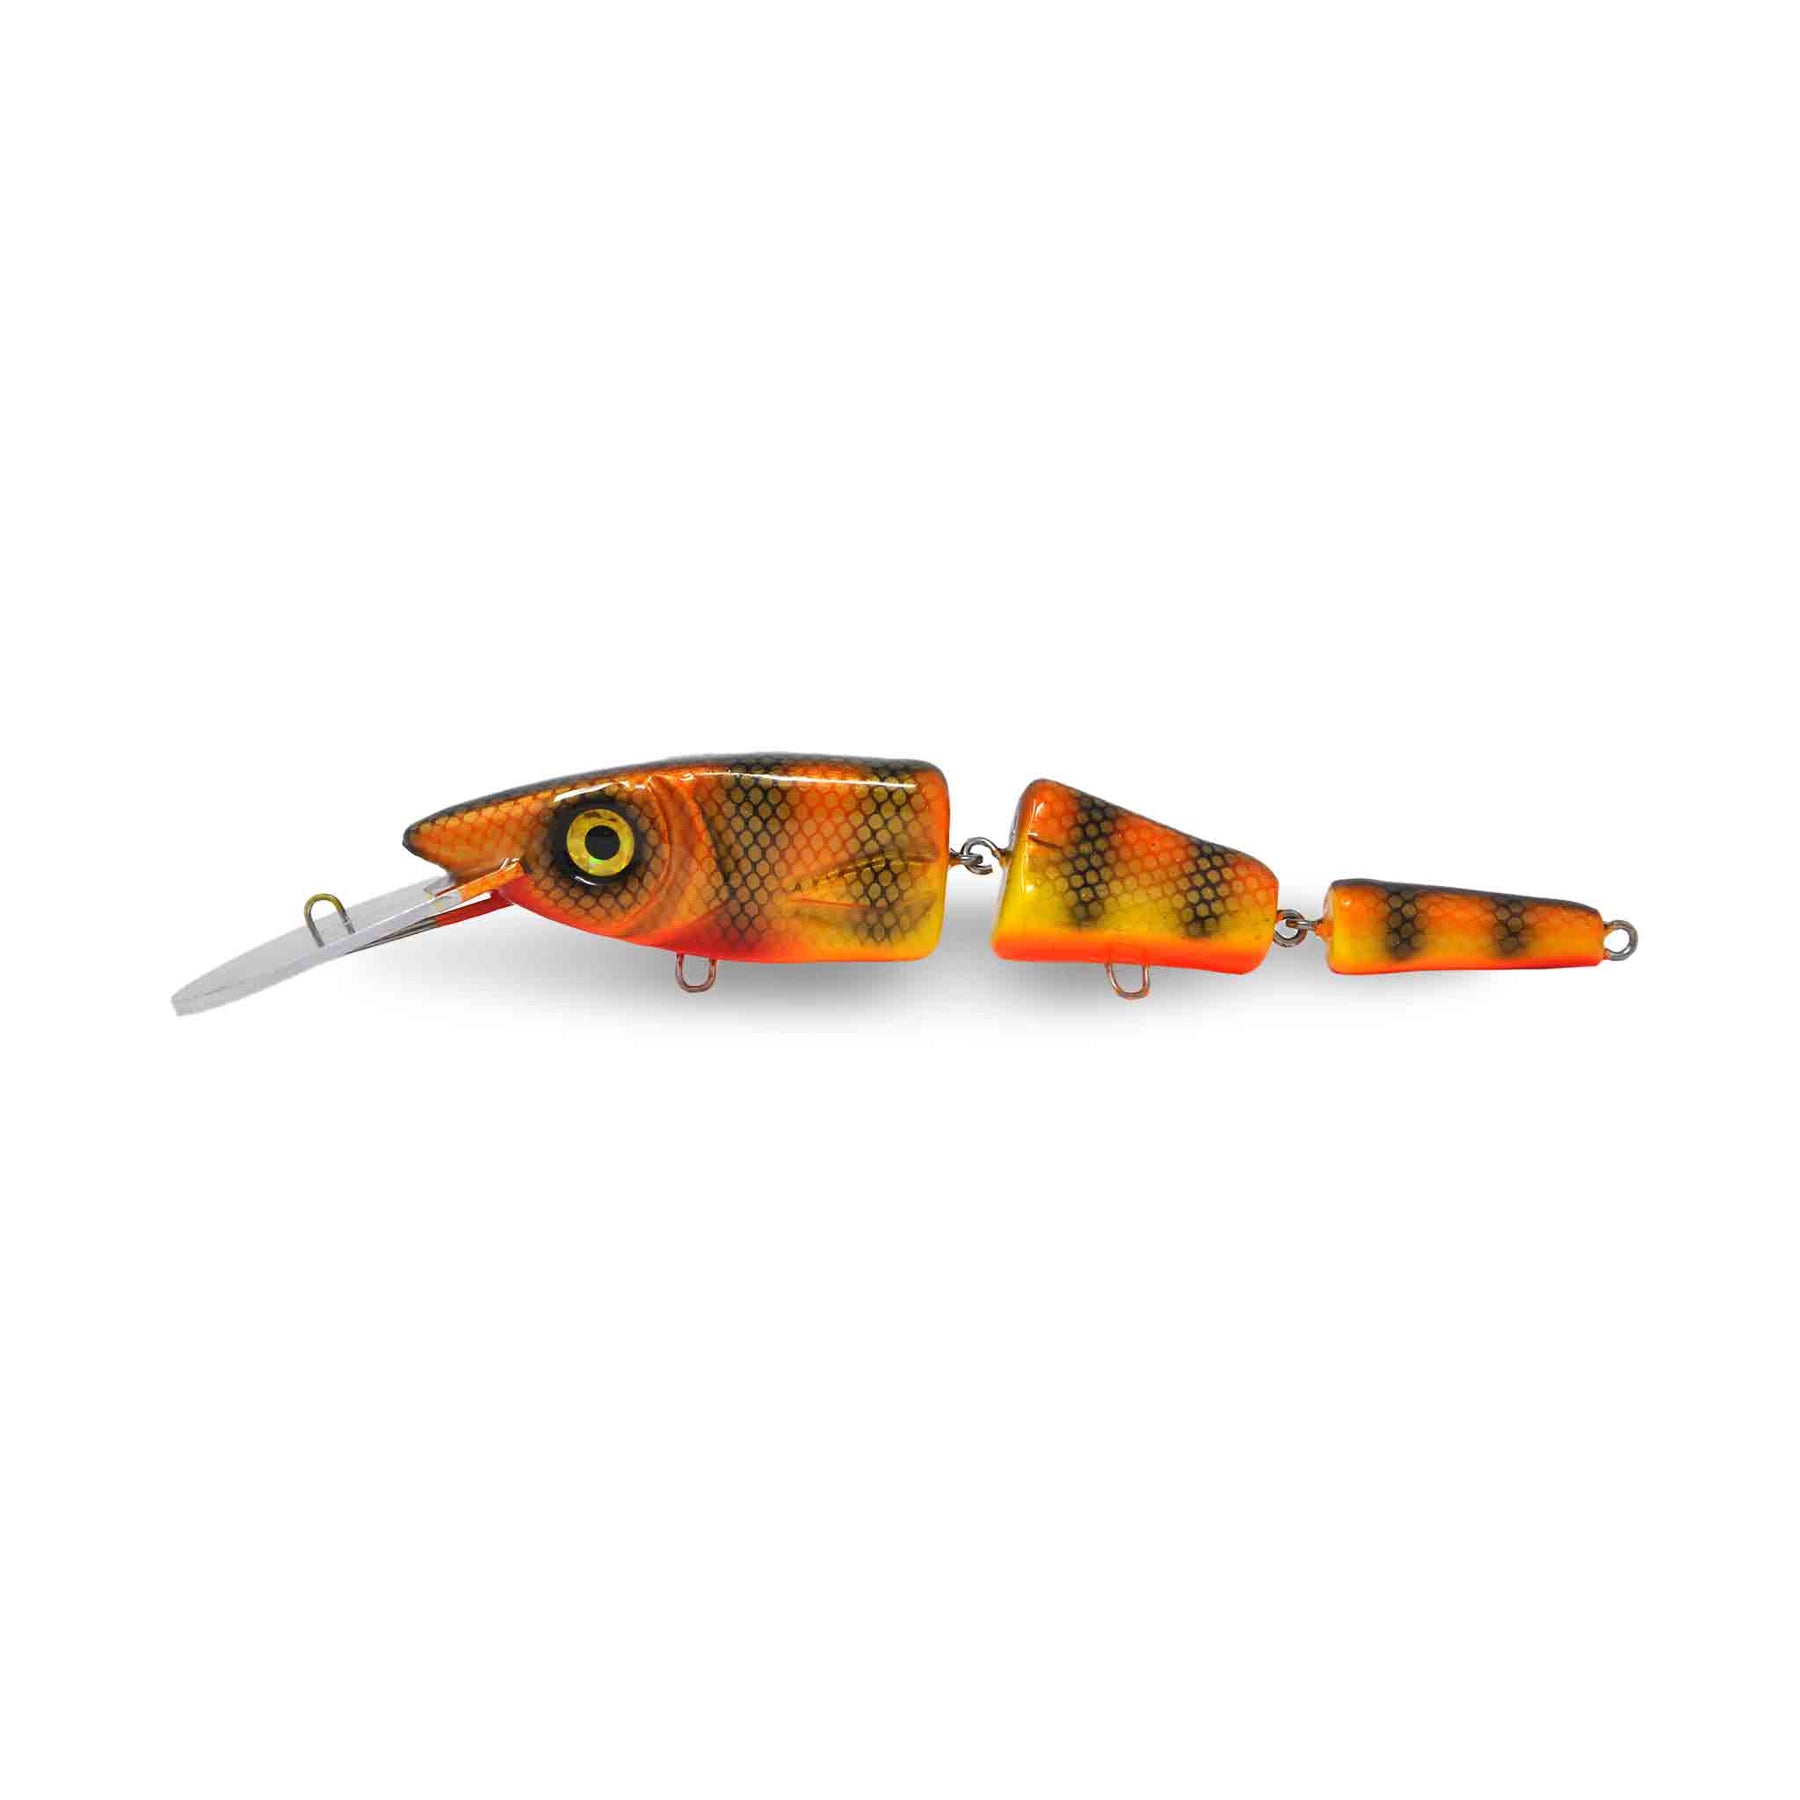 View of Crankbaits Scorpion MadBait Double-Jointed 10'' Crankbait Orange Perch available at EZOKO Pike and Musky Shop